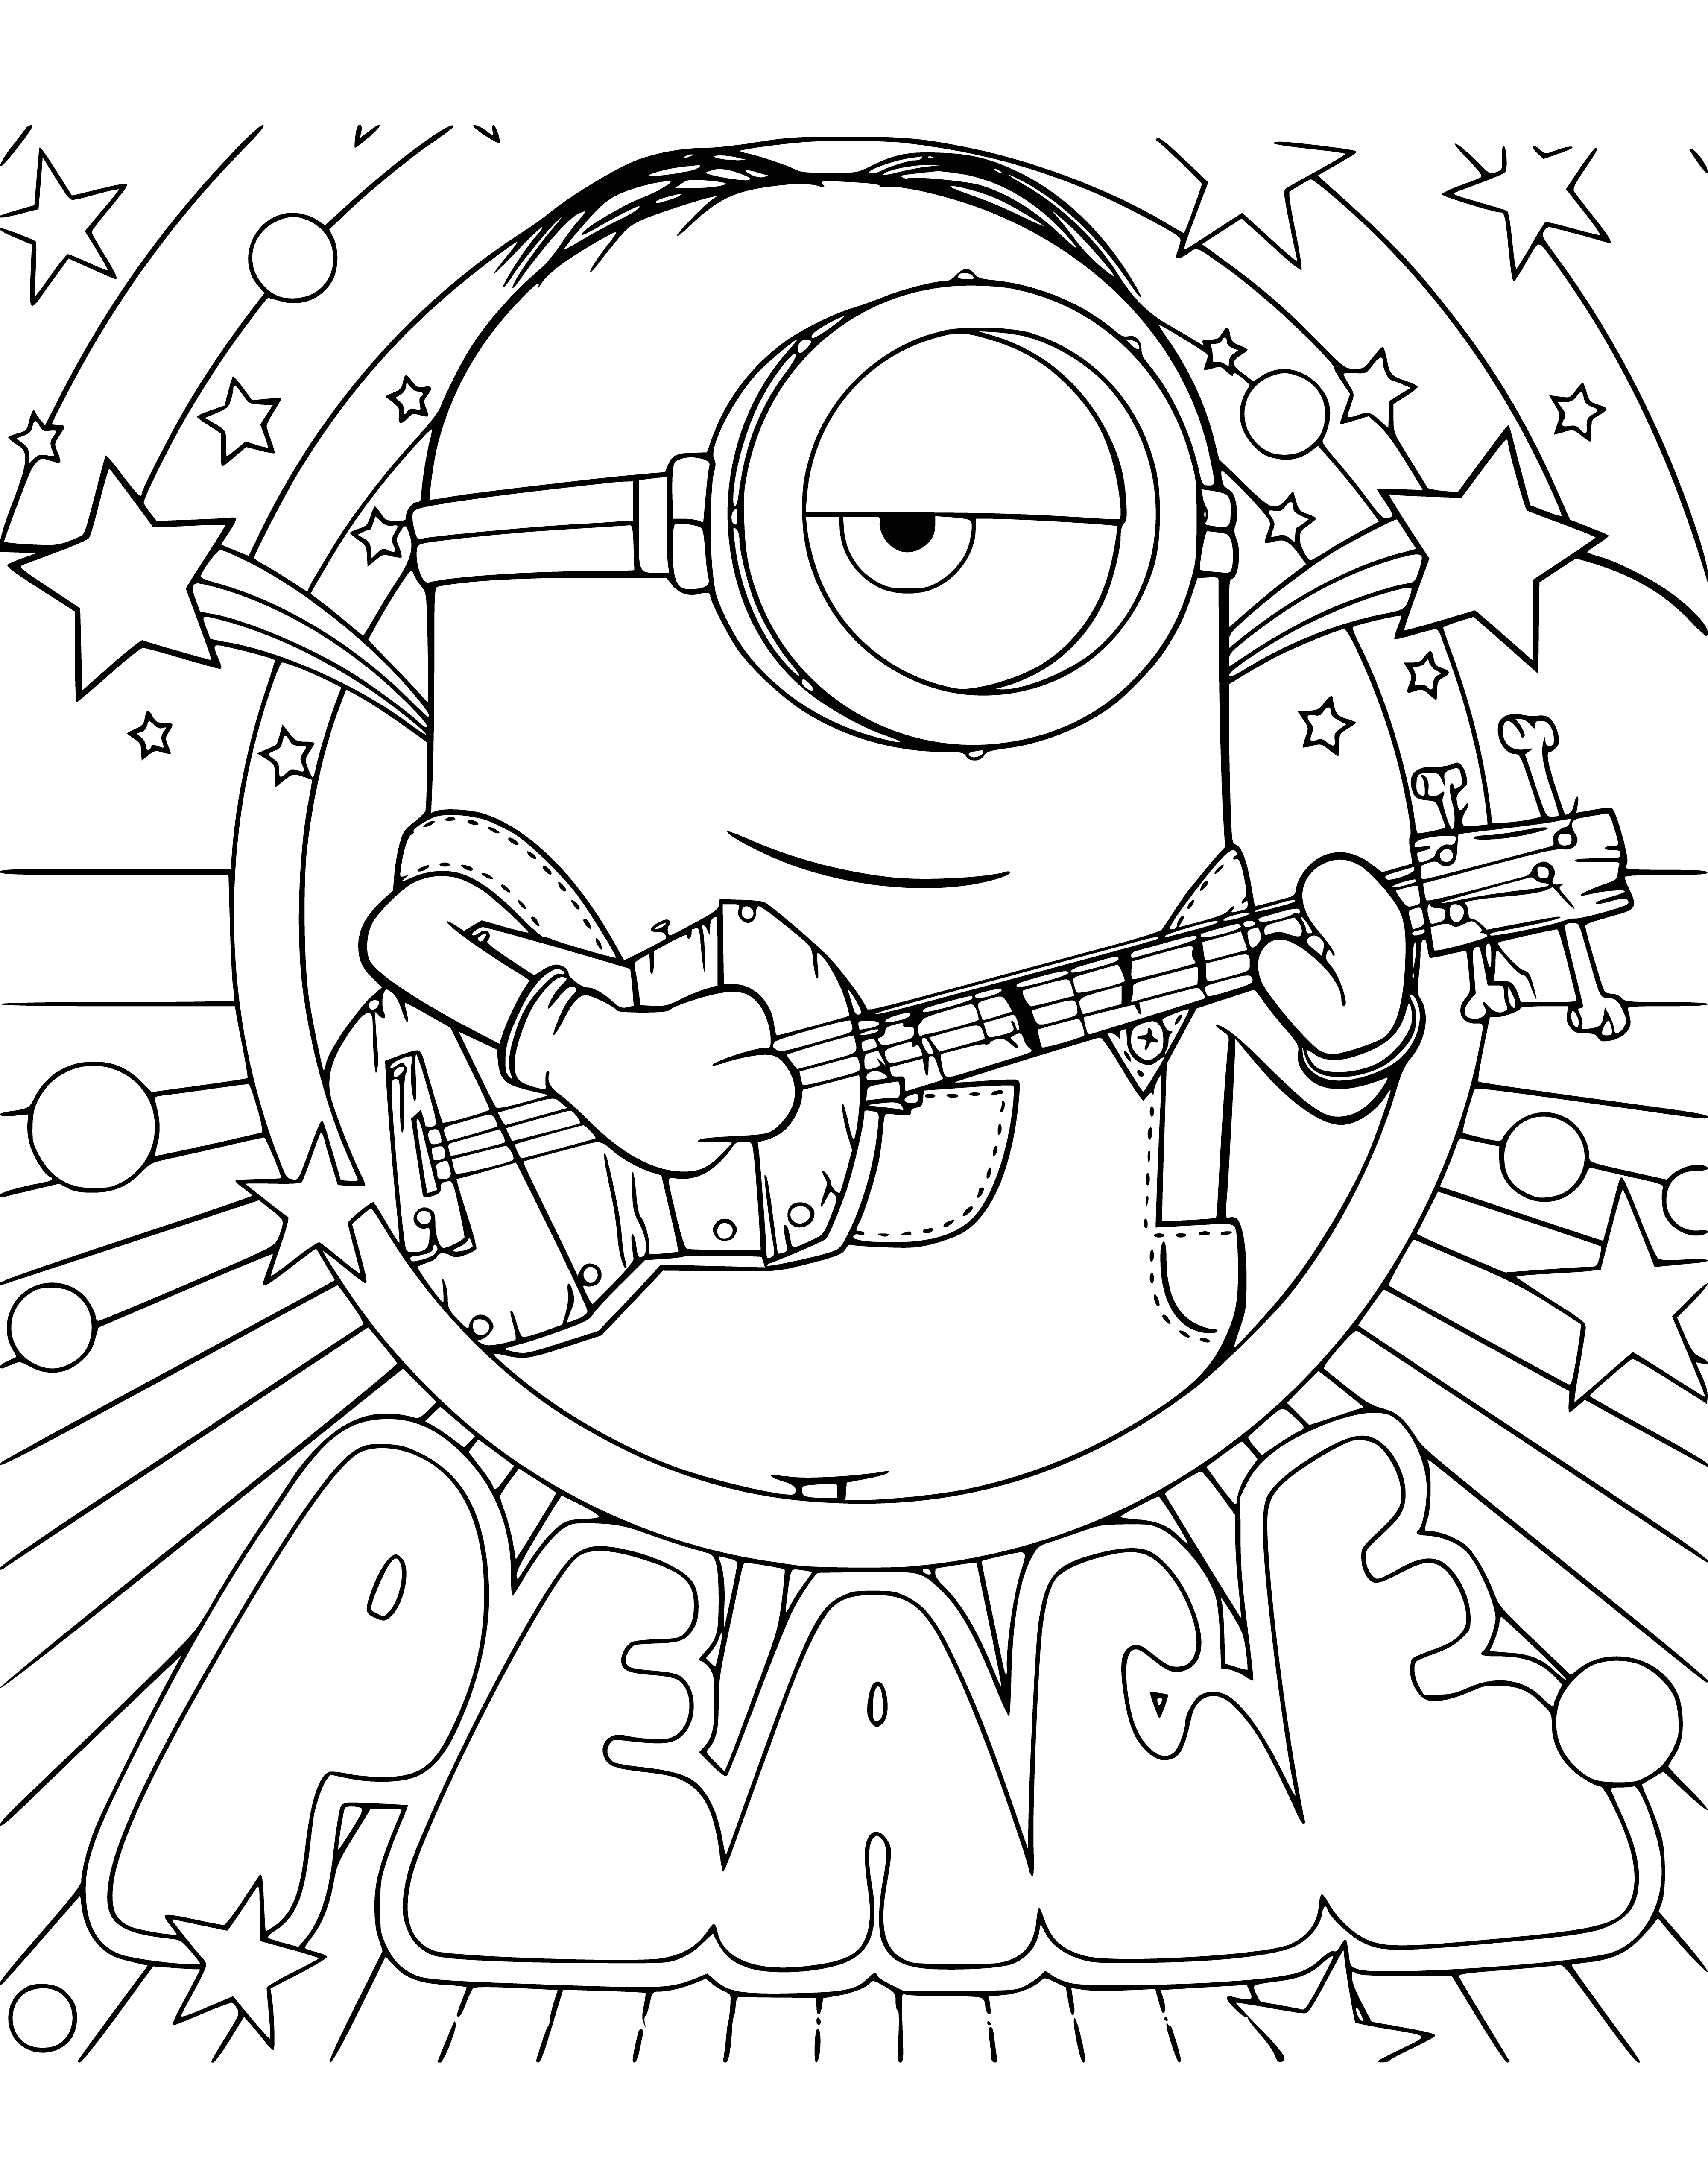 coloring page: Minions are yellow, one-eyed creatures in blue overalls. They have two arms and two legs with small noses and mouths.